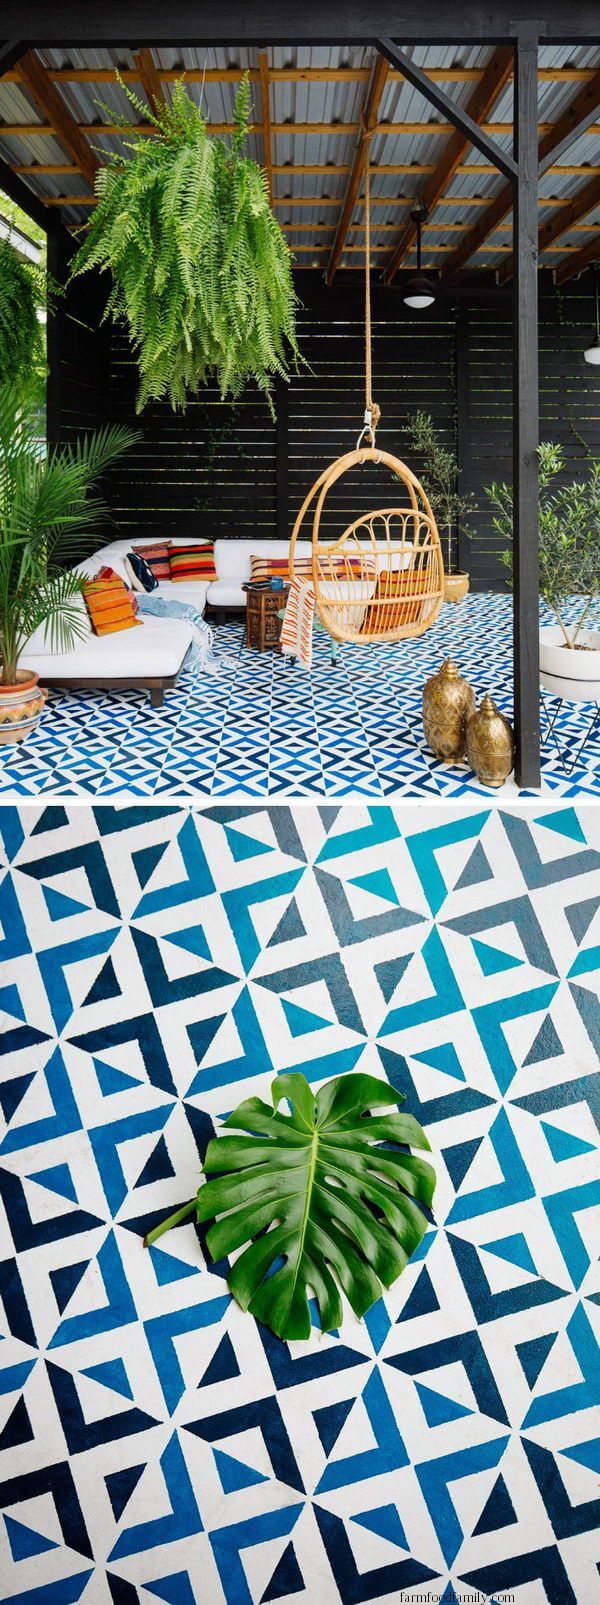 Painted Patio Tiles